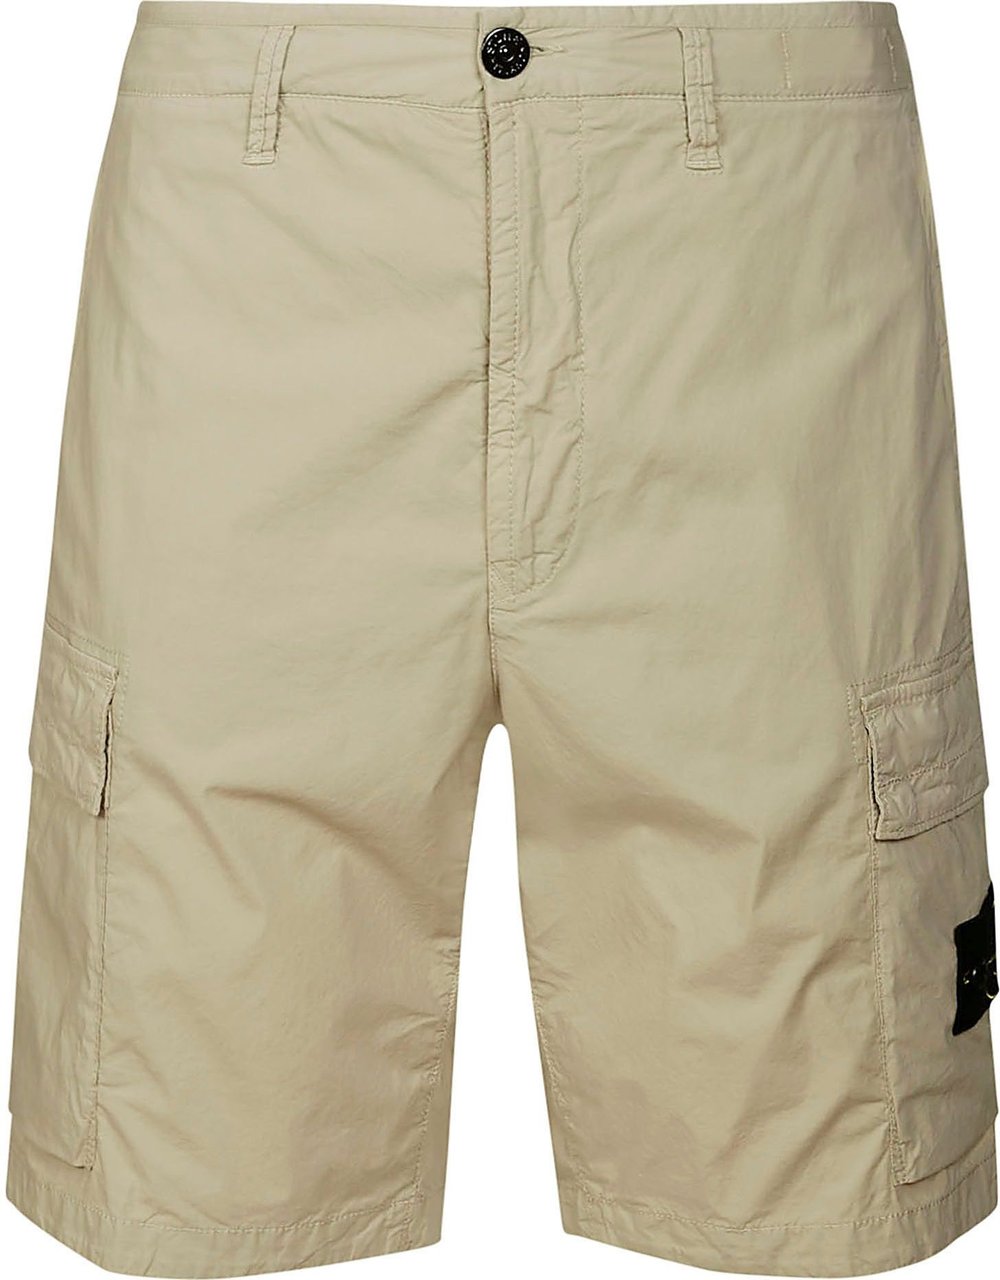 Stone Island Shorts Divers Divers